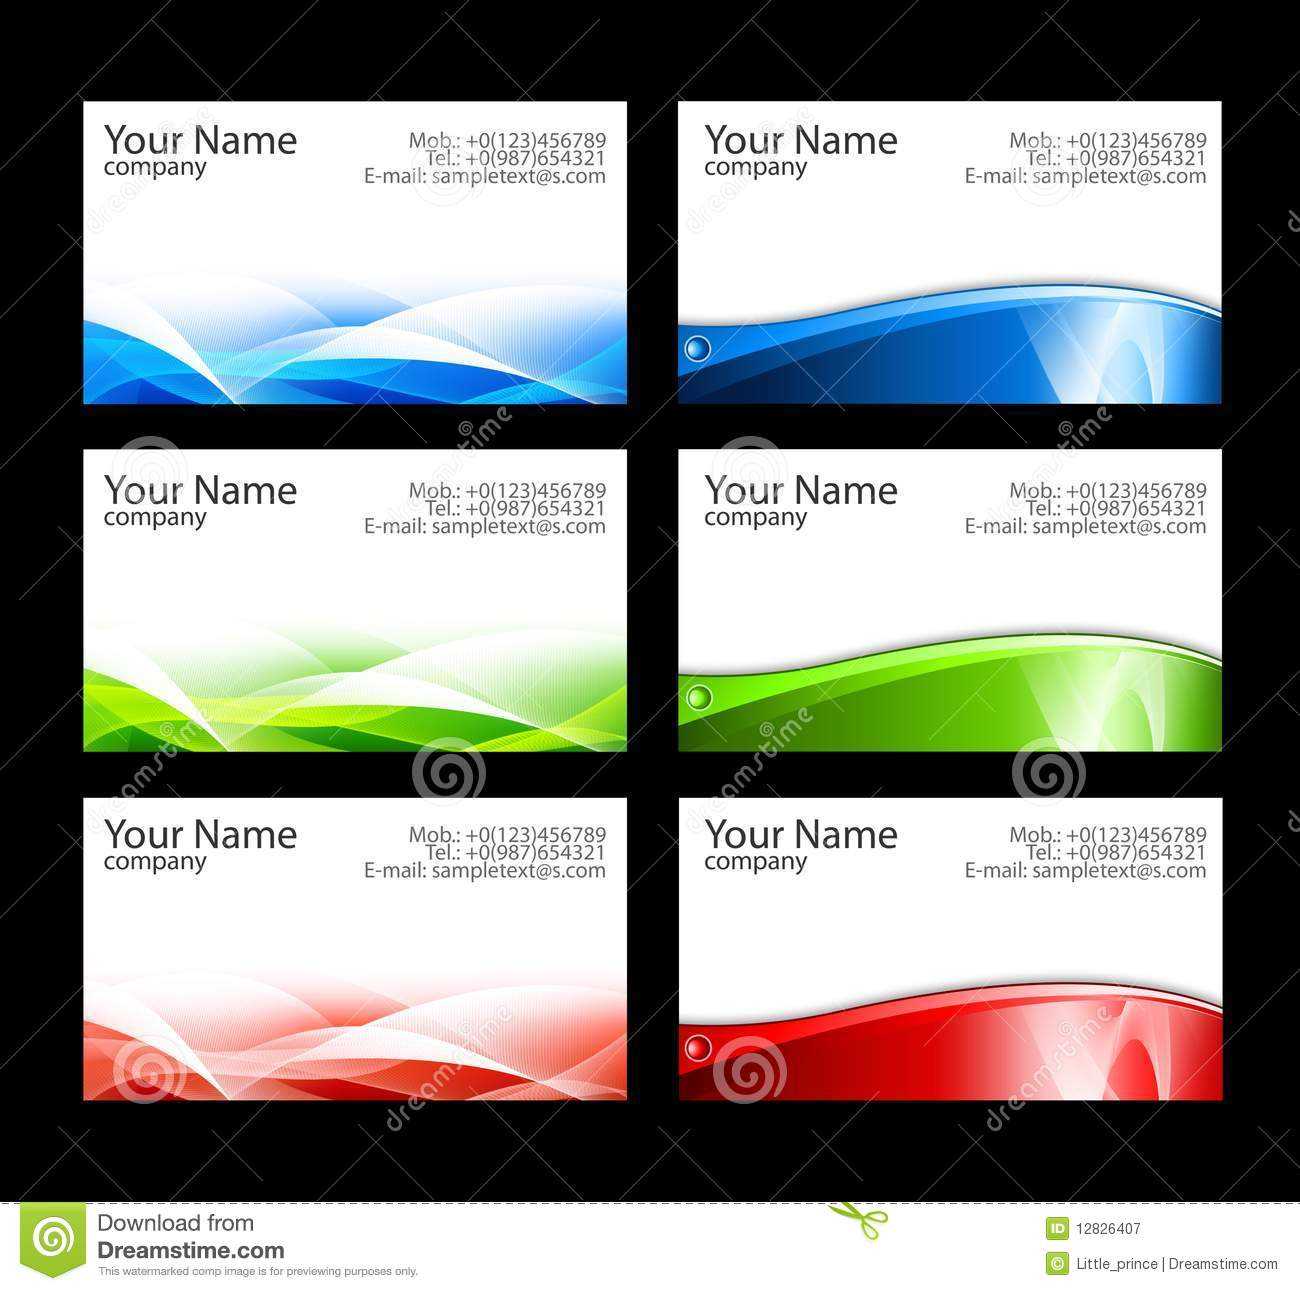 Business Cards Templates Stock Illustration. Illustration Of With Regard To Microsoft Templates For Business Cards